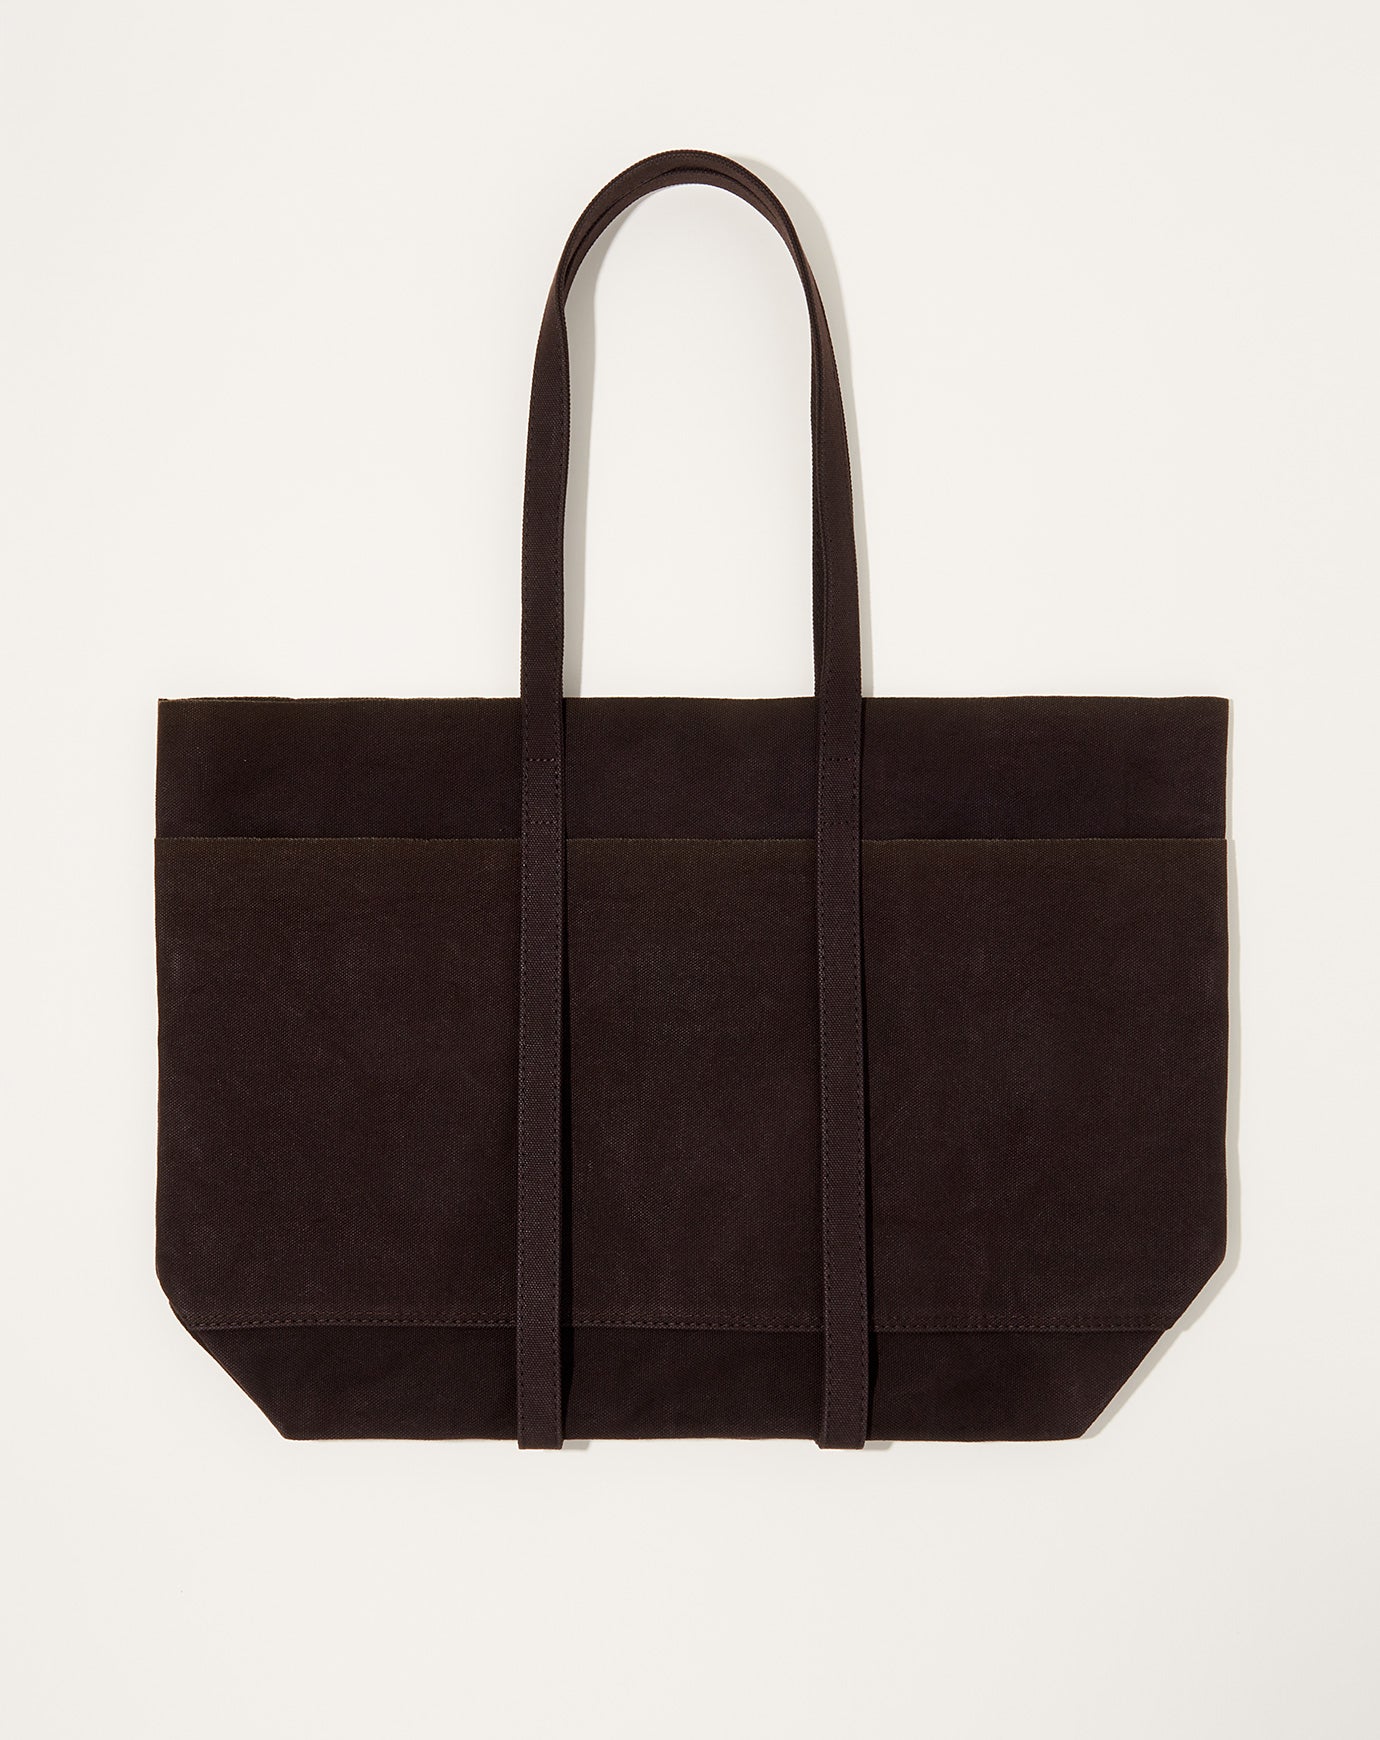 Amiacalva Light Ounce Canvas Tote in Chocolate